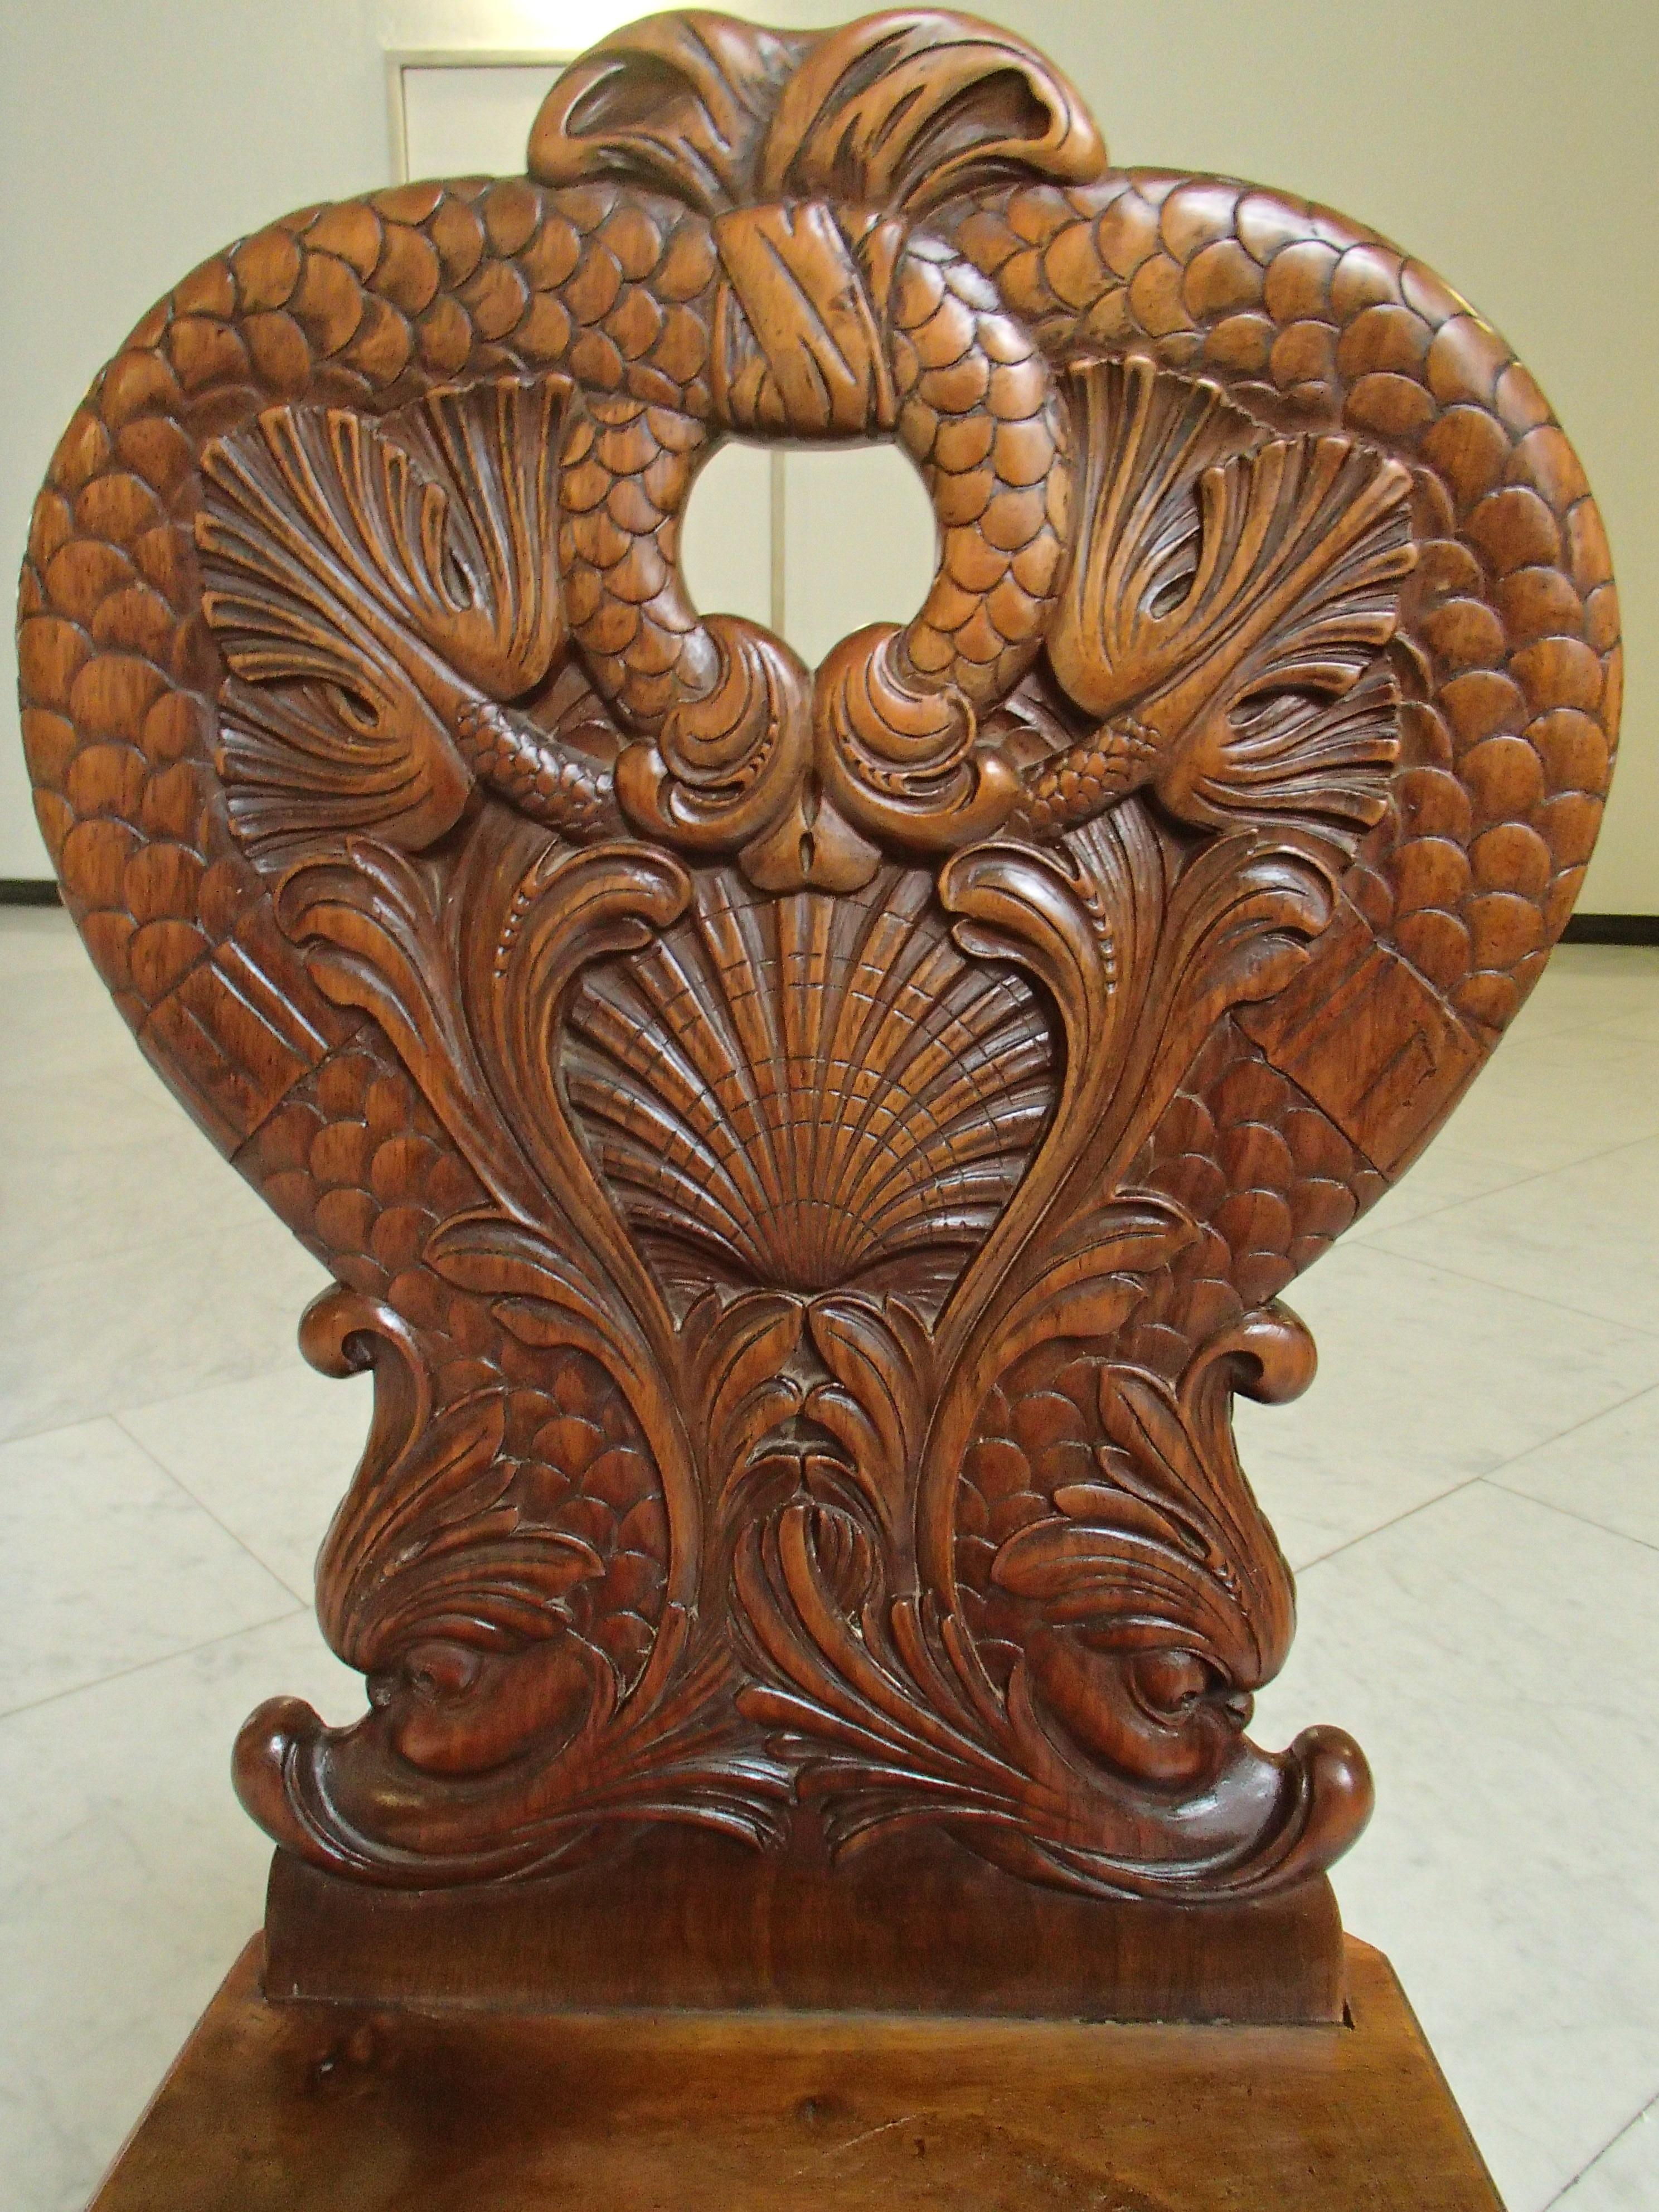 Pair of Brutalist Wooden Chairs Carved with Fabulous Creatures, Dragons 1